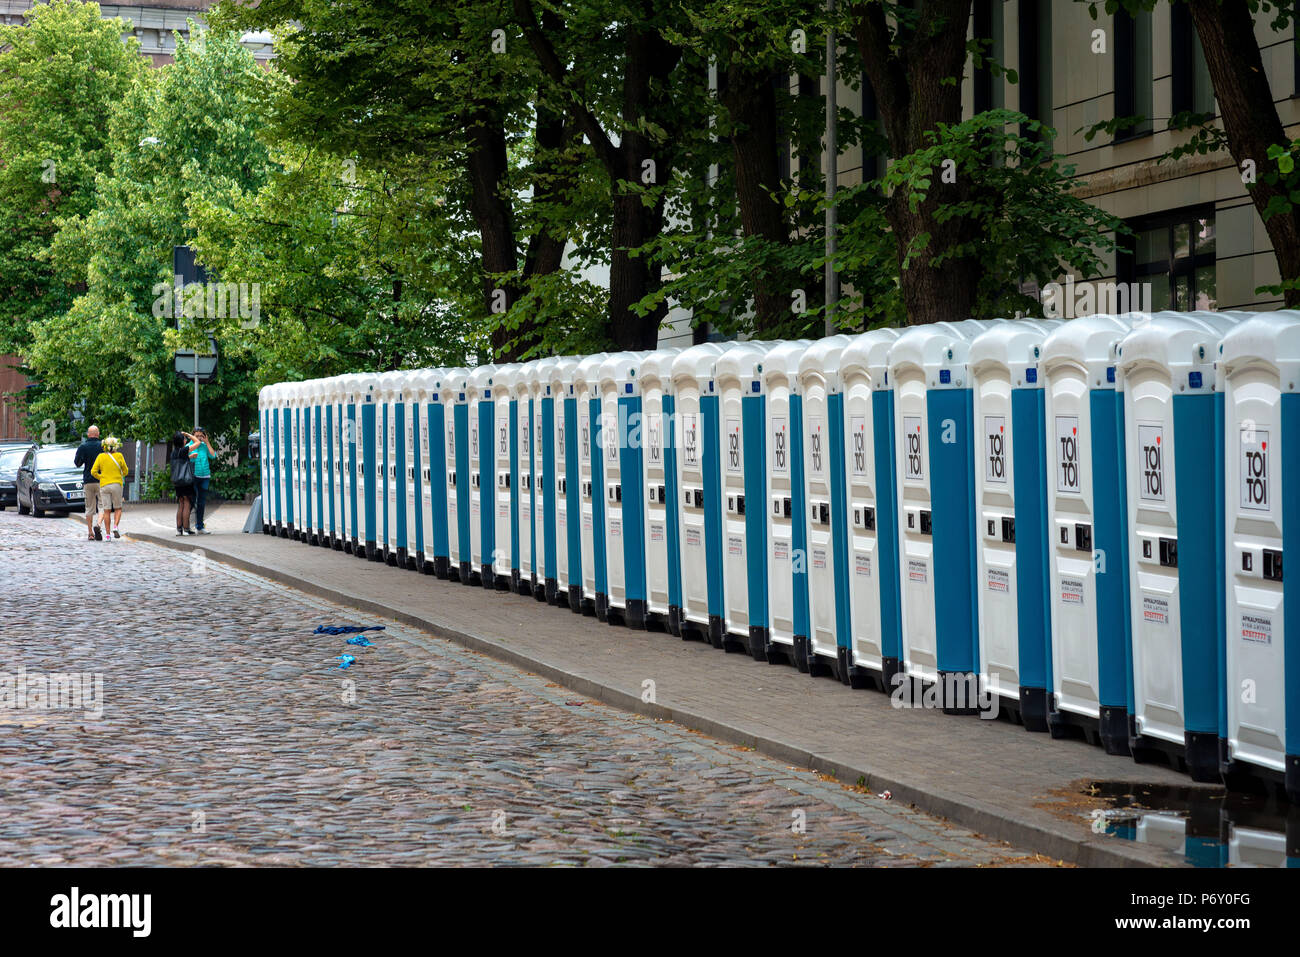 RIGA, LATVIA - JUNE 22, 2018: Summer solstice market. On the edge of City Street there is a row with portable public toilets. Stock Photo